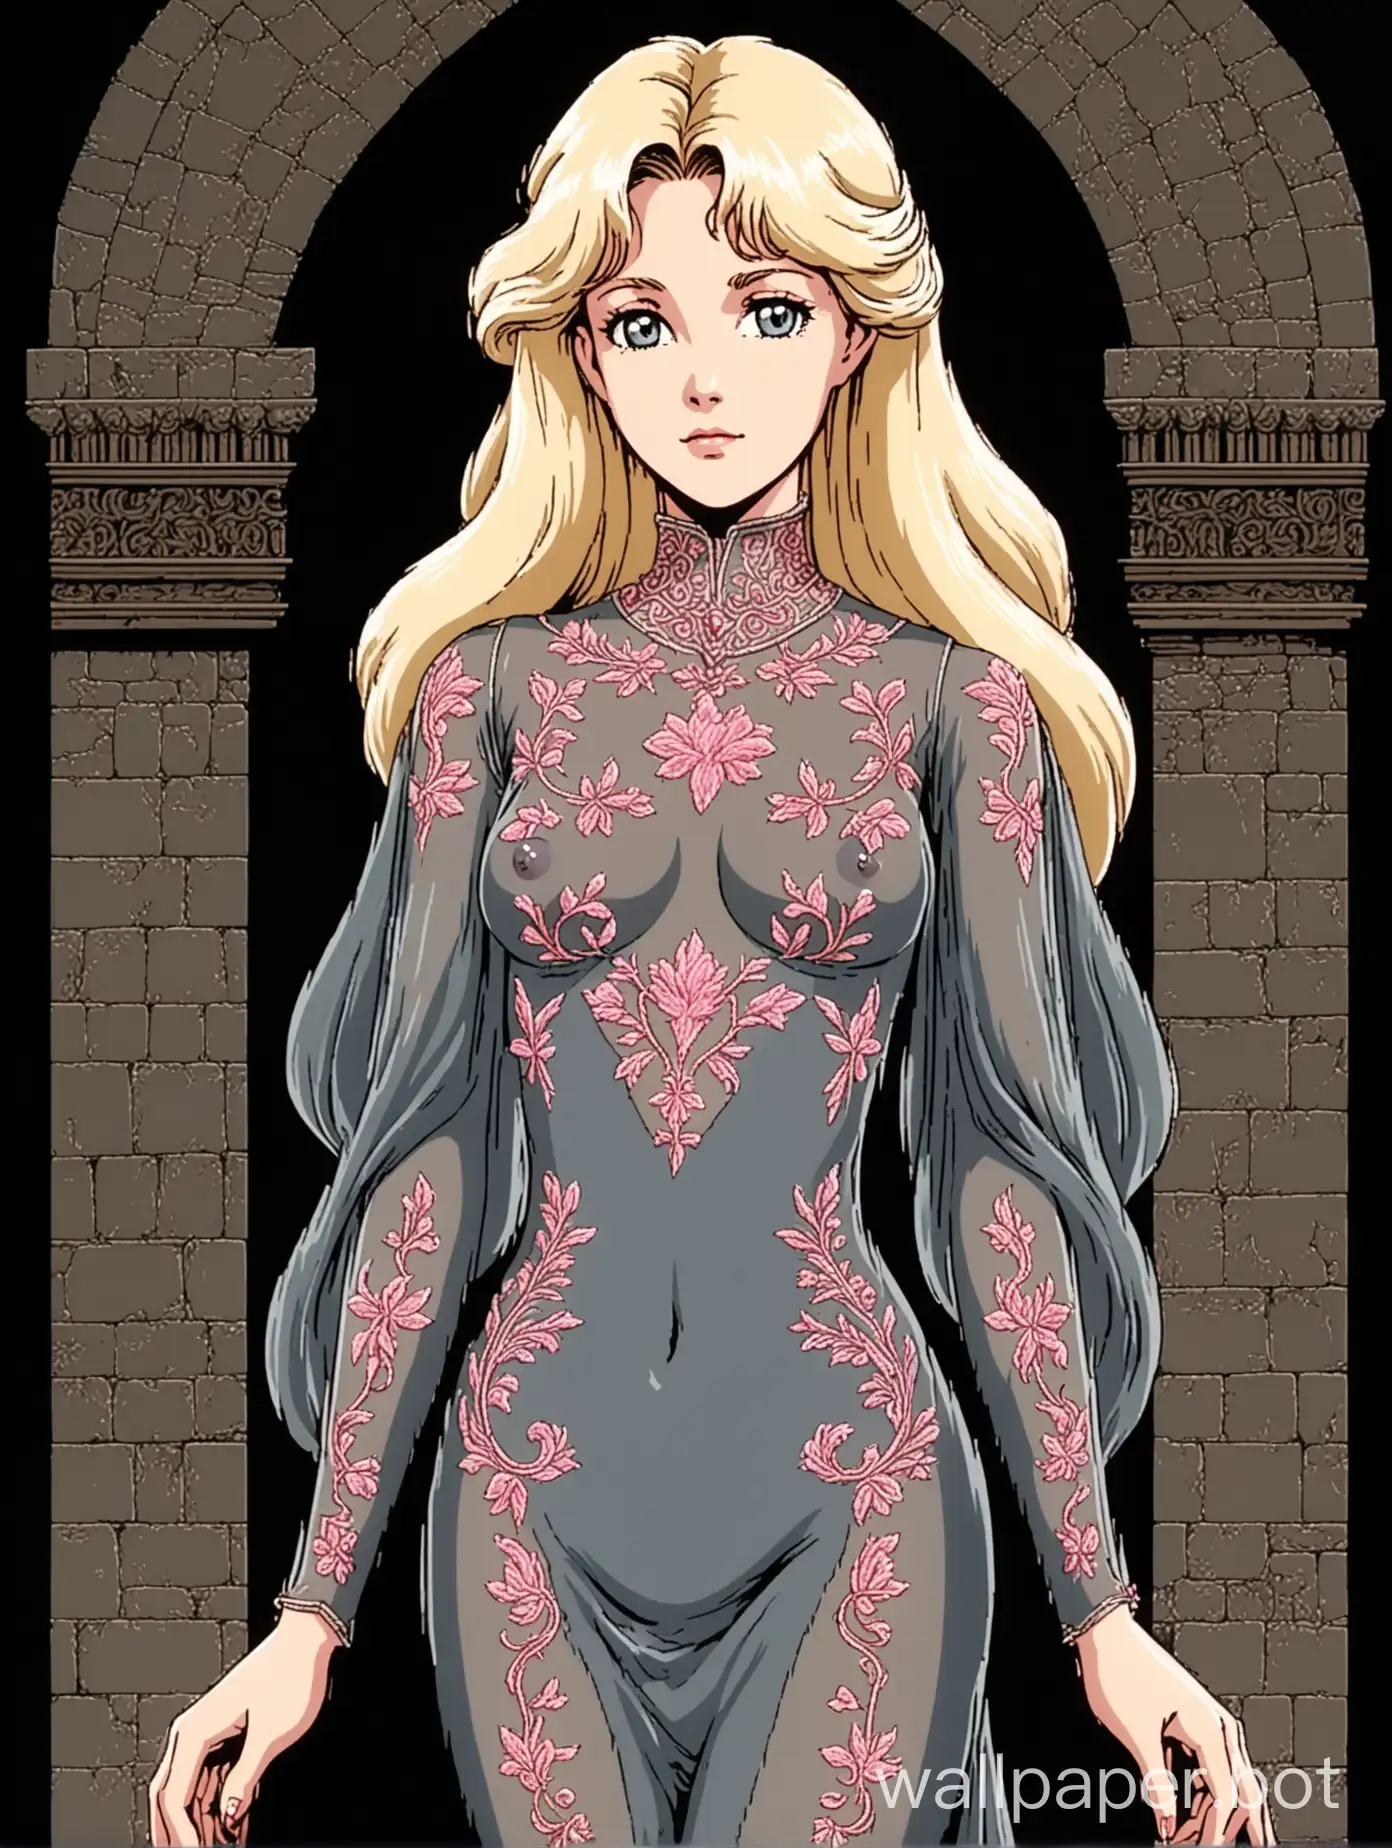 a young and attractive white woman, she has long wavy white-blonde hair, standing regally, elegant and slender, wearing a sheer dark grey skintight dress, full coverage, silhouette of her perky nipples, pink nipples, detailed embroidery on her chest, ornate stitching, medieval elegance, 1980s retro anime